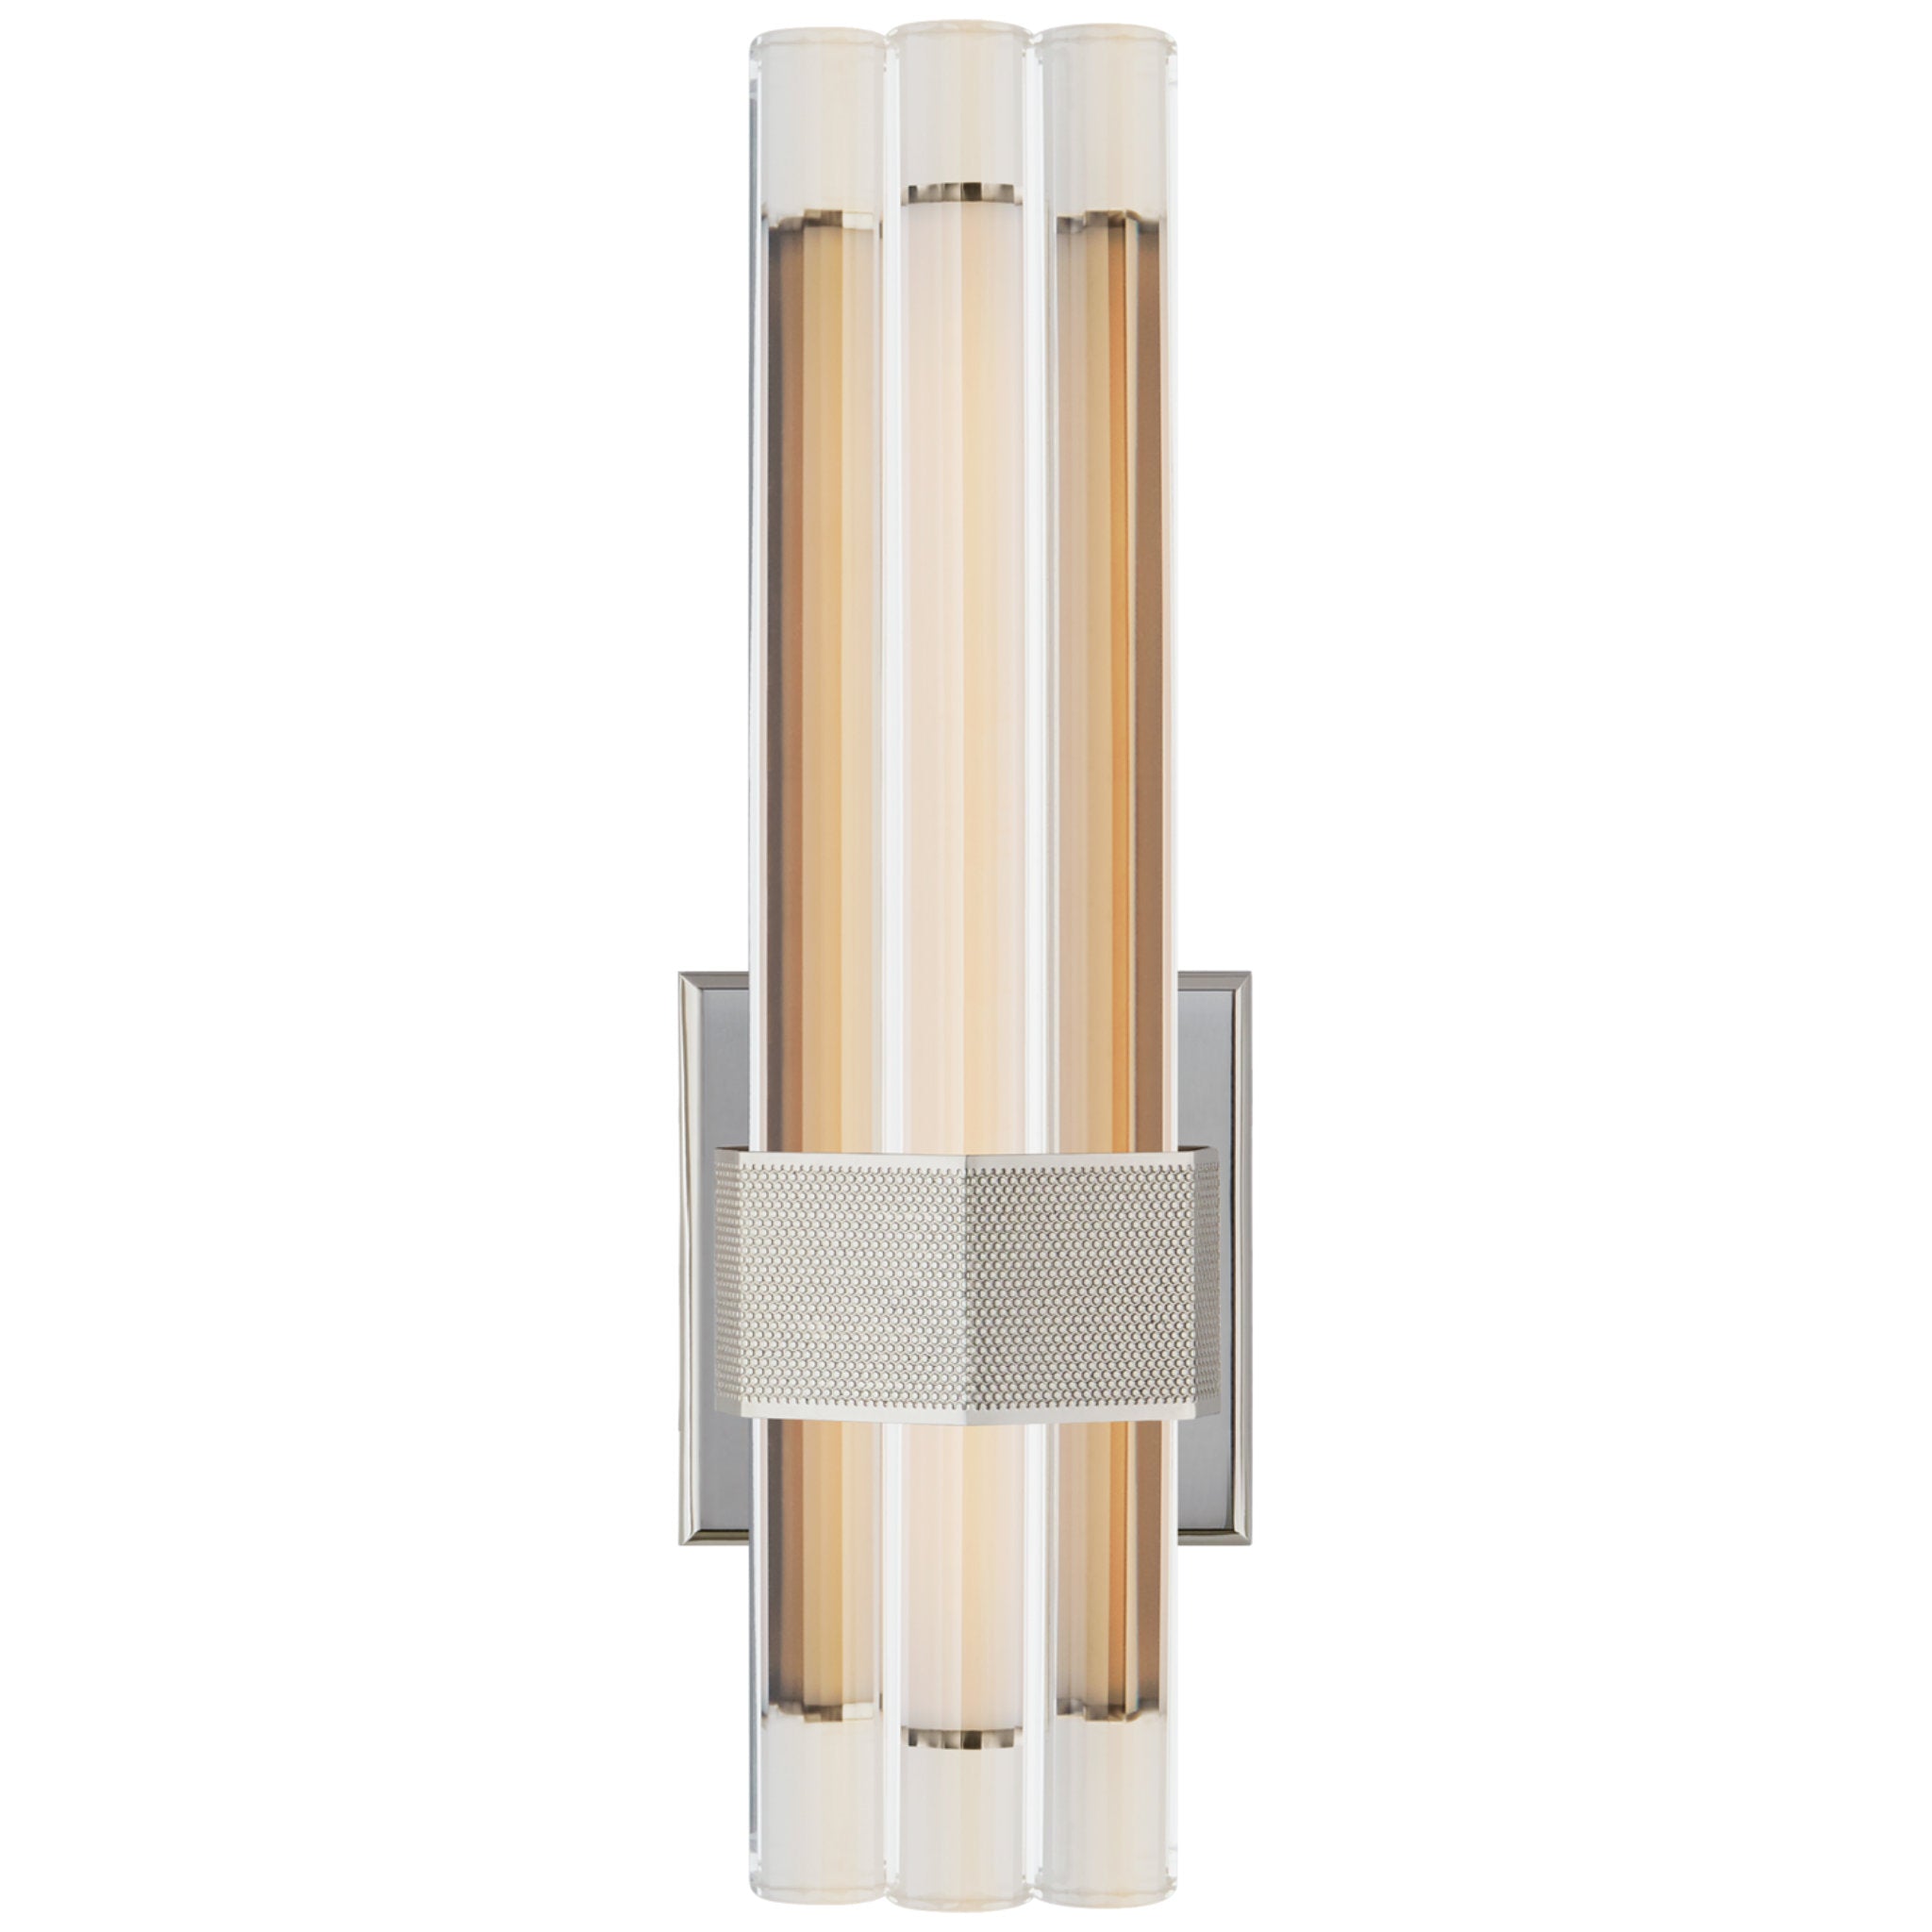 Lauren Rottet Fascio 14" Asymmetric Sconce in Polished Nickel with Crystal